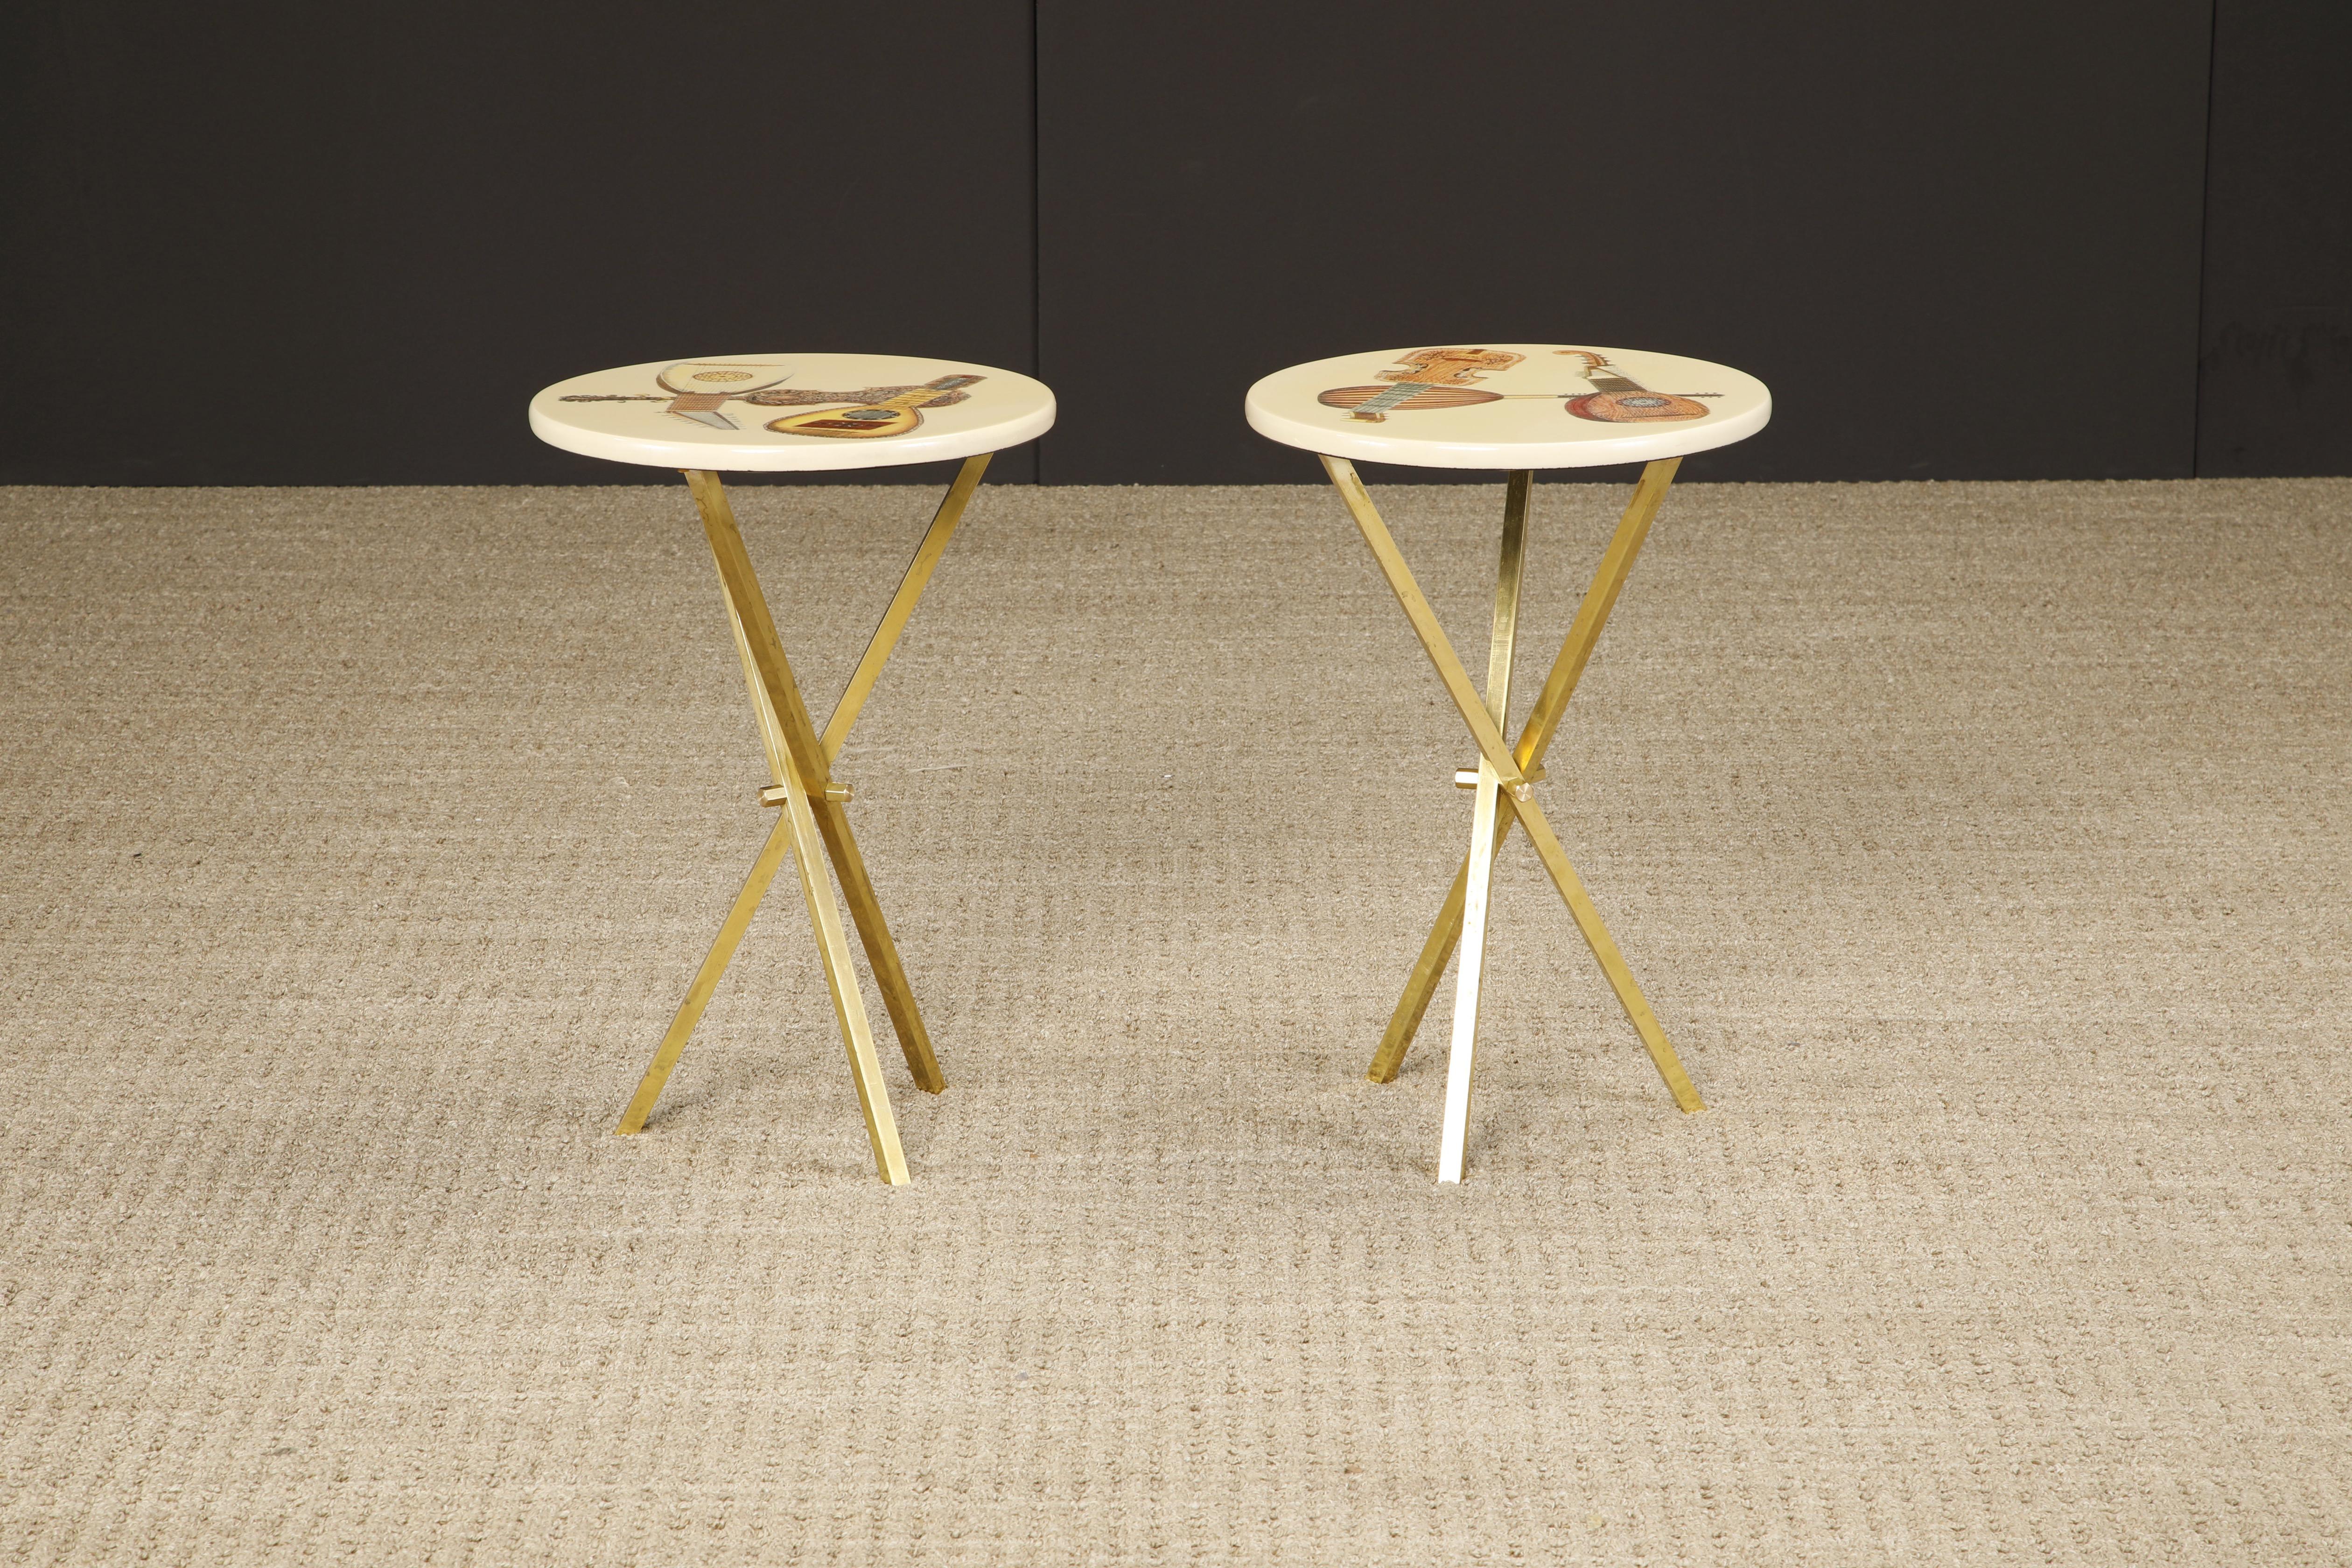 Mid-Century Modern 'Strumenti Musicali' Drinks / Side Tables by Piero Fornasetti, c 1970s, Signed For Sale